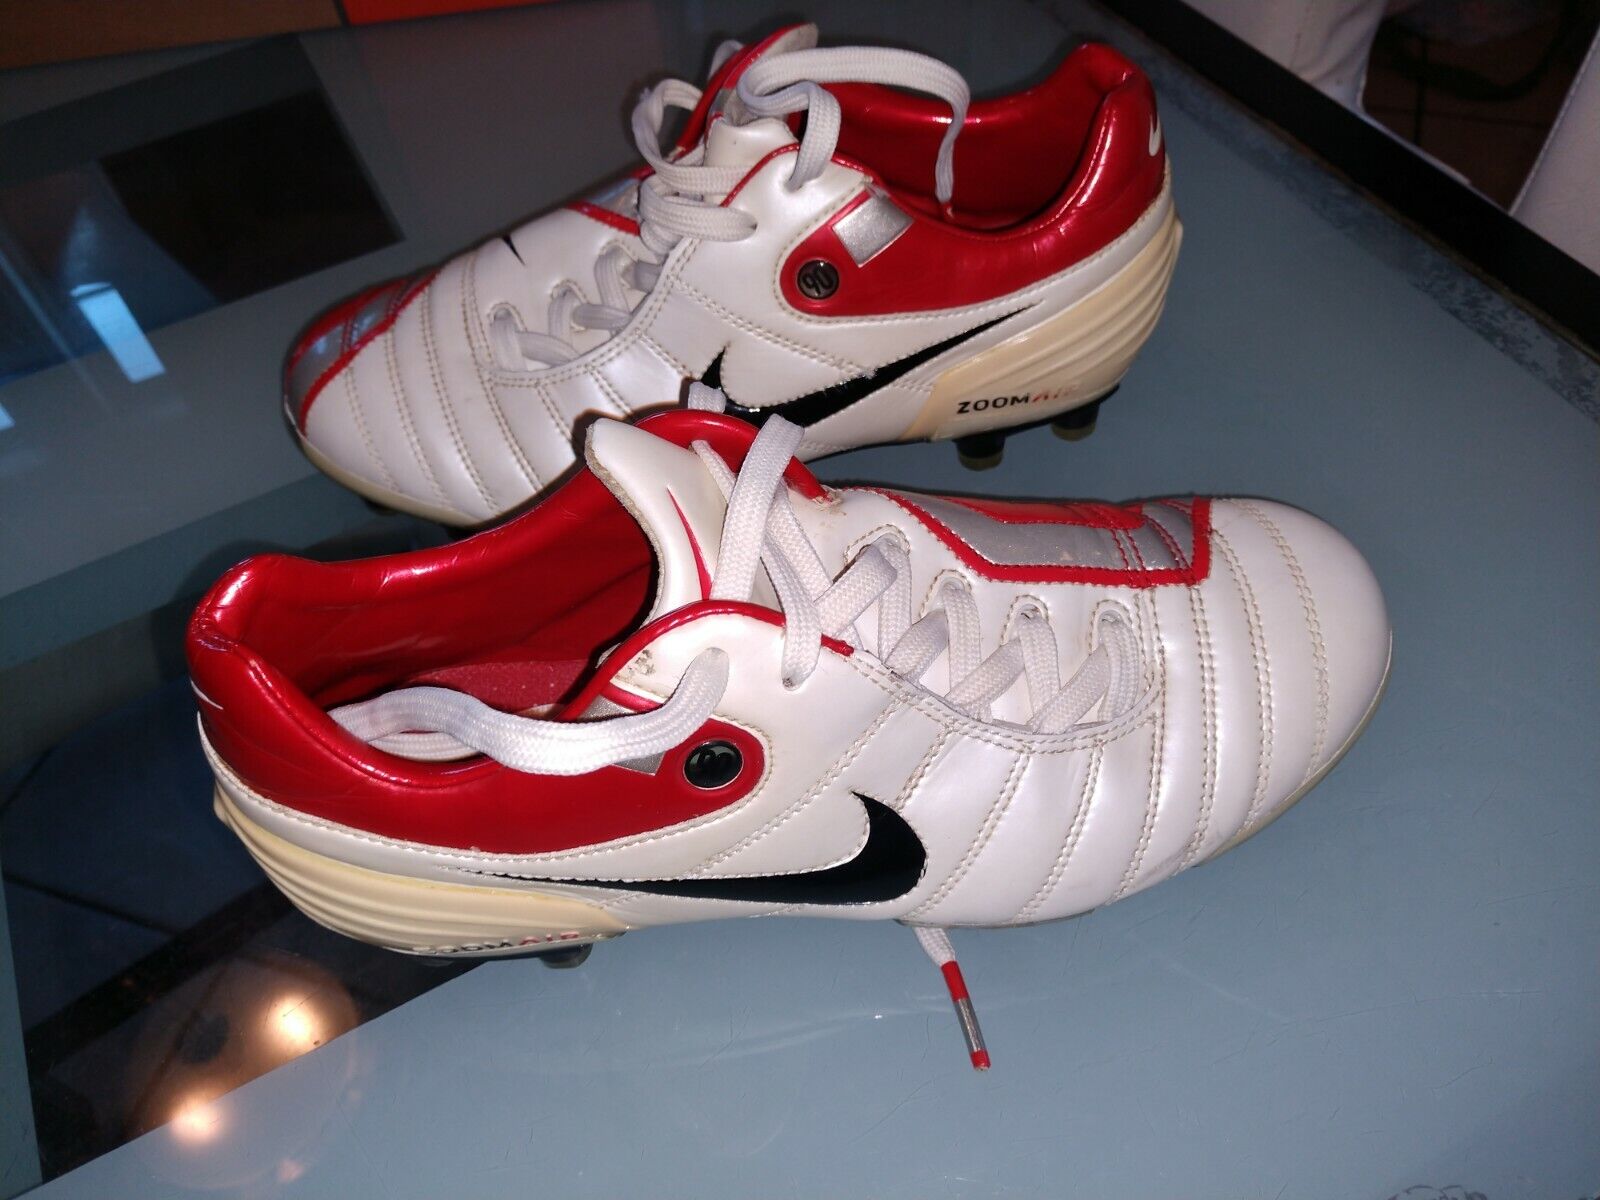 Nike Air Zoom Total 90 Vintage Retro Soccer Cleats Size 5.5